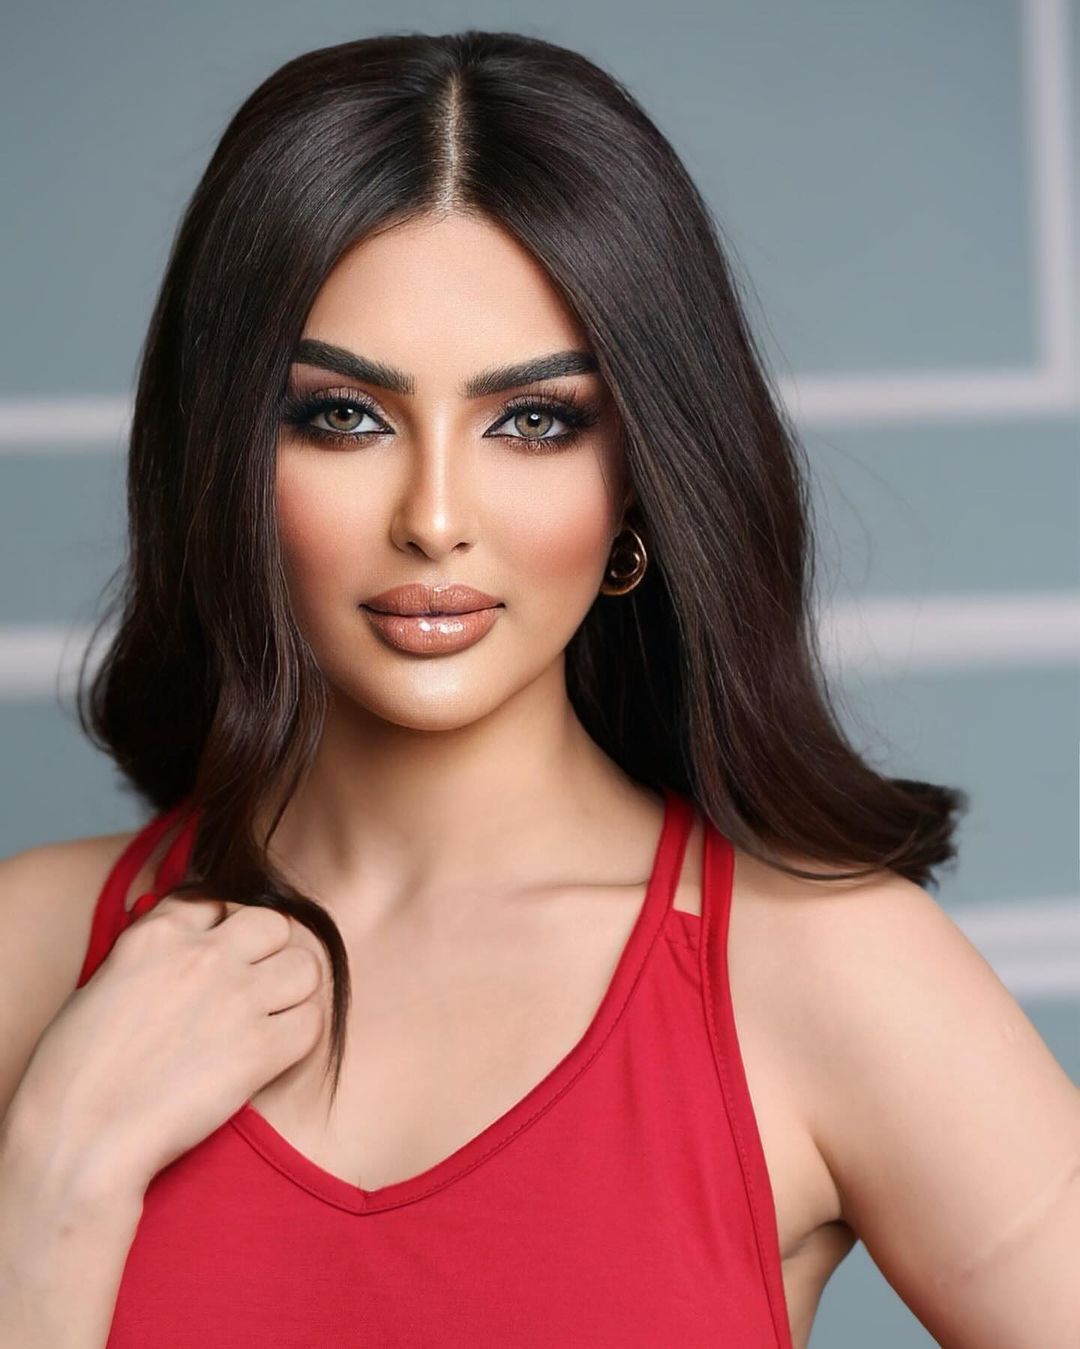 Miss Universe organizers denied Saudi Arabia's participation in the contest and accused the 27-year-old model of lying